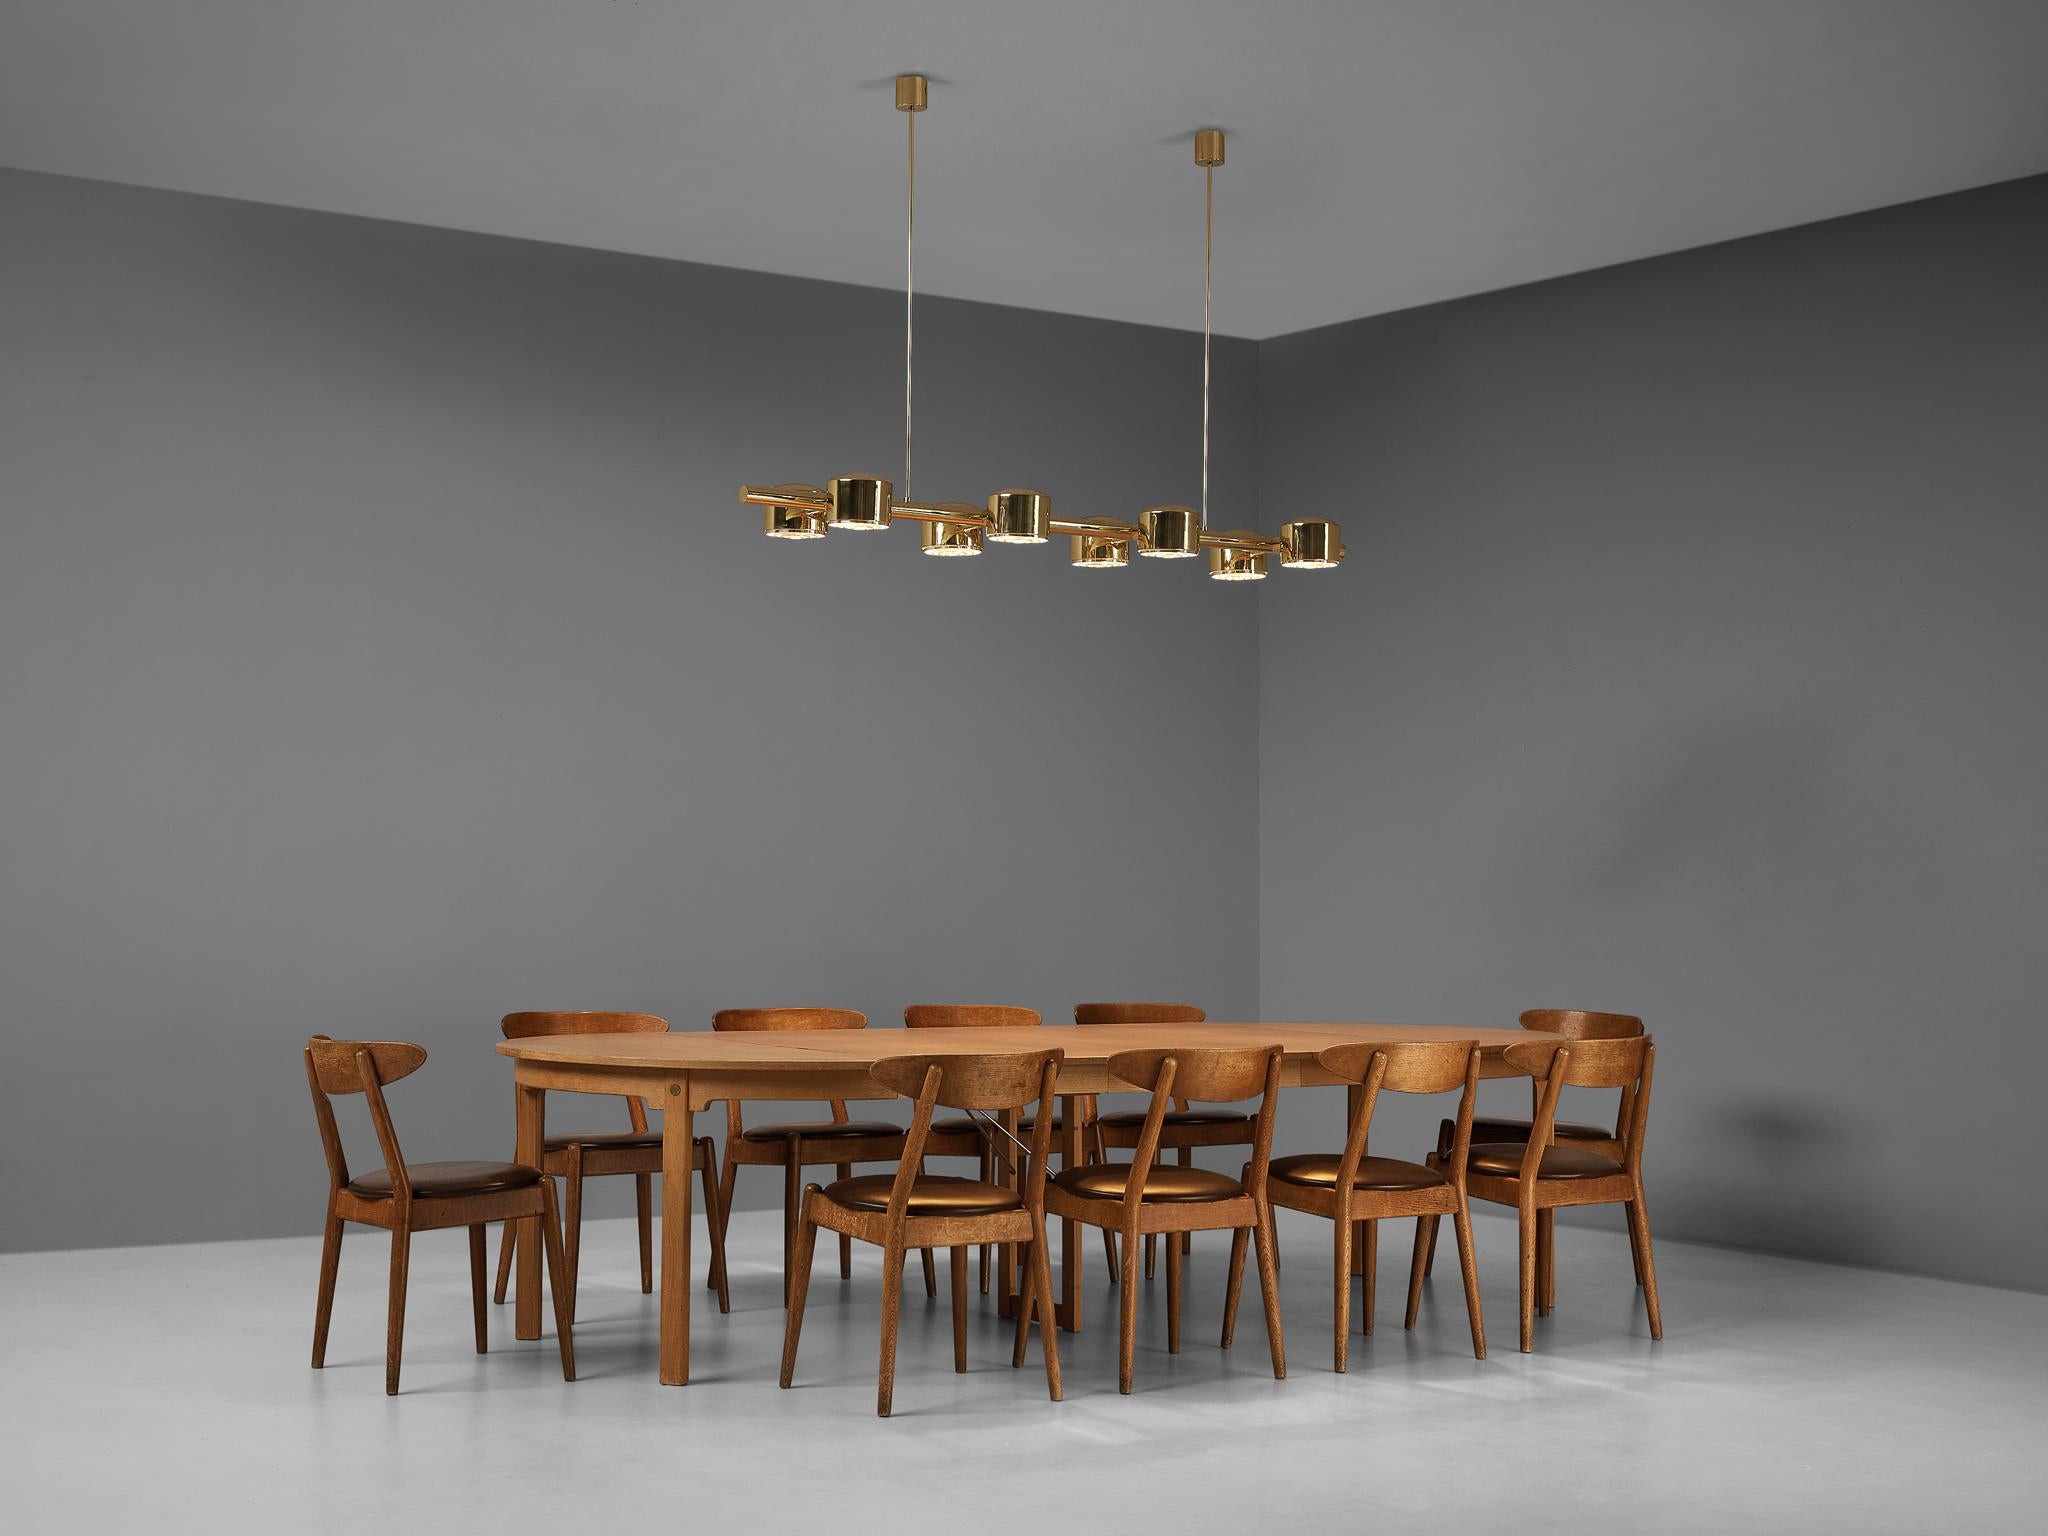 Jørgen Bo and Vilhelm Wohlert for P. Jeppesens Møbelfabrik, set of twelve ‘Louisiana’ dining chairs, oak, leather, Denmark, 1958
The ‘Louisiana’ chair was initially created for the Louisiana Museum of Modern Art in Humlebæk (Denmark) which Danish